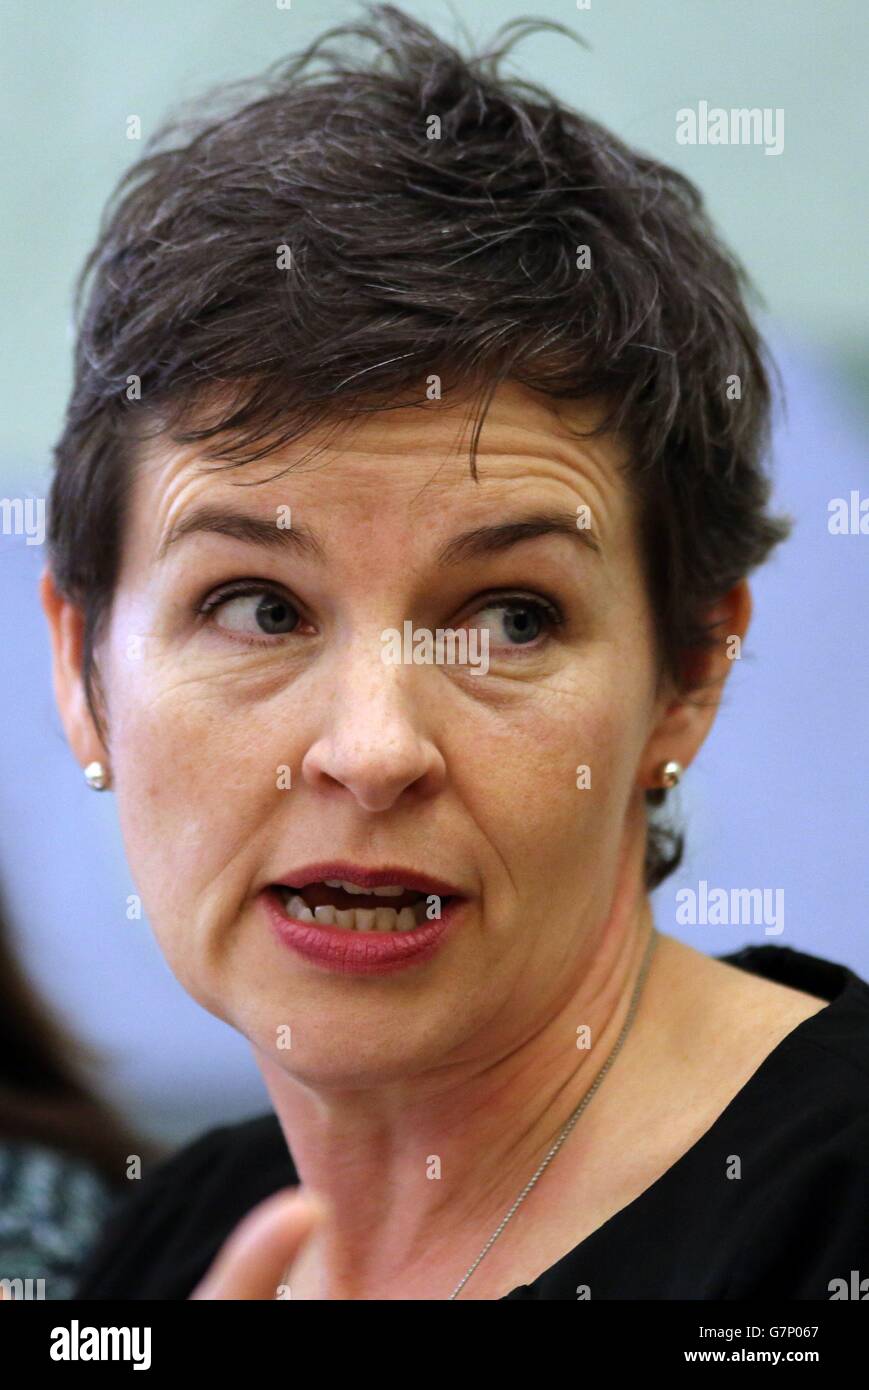 Mary Creagh MP speaks during a fashion question and answer session during the Fashion Question Time event in partnership with Fashion Revolution held at Portcullis House, in London. Stock Photo